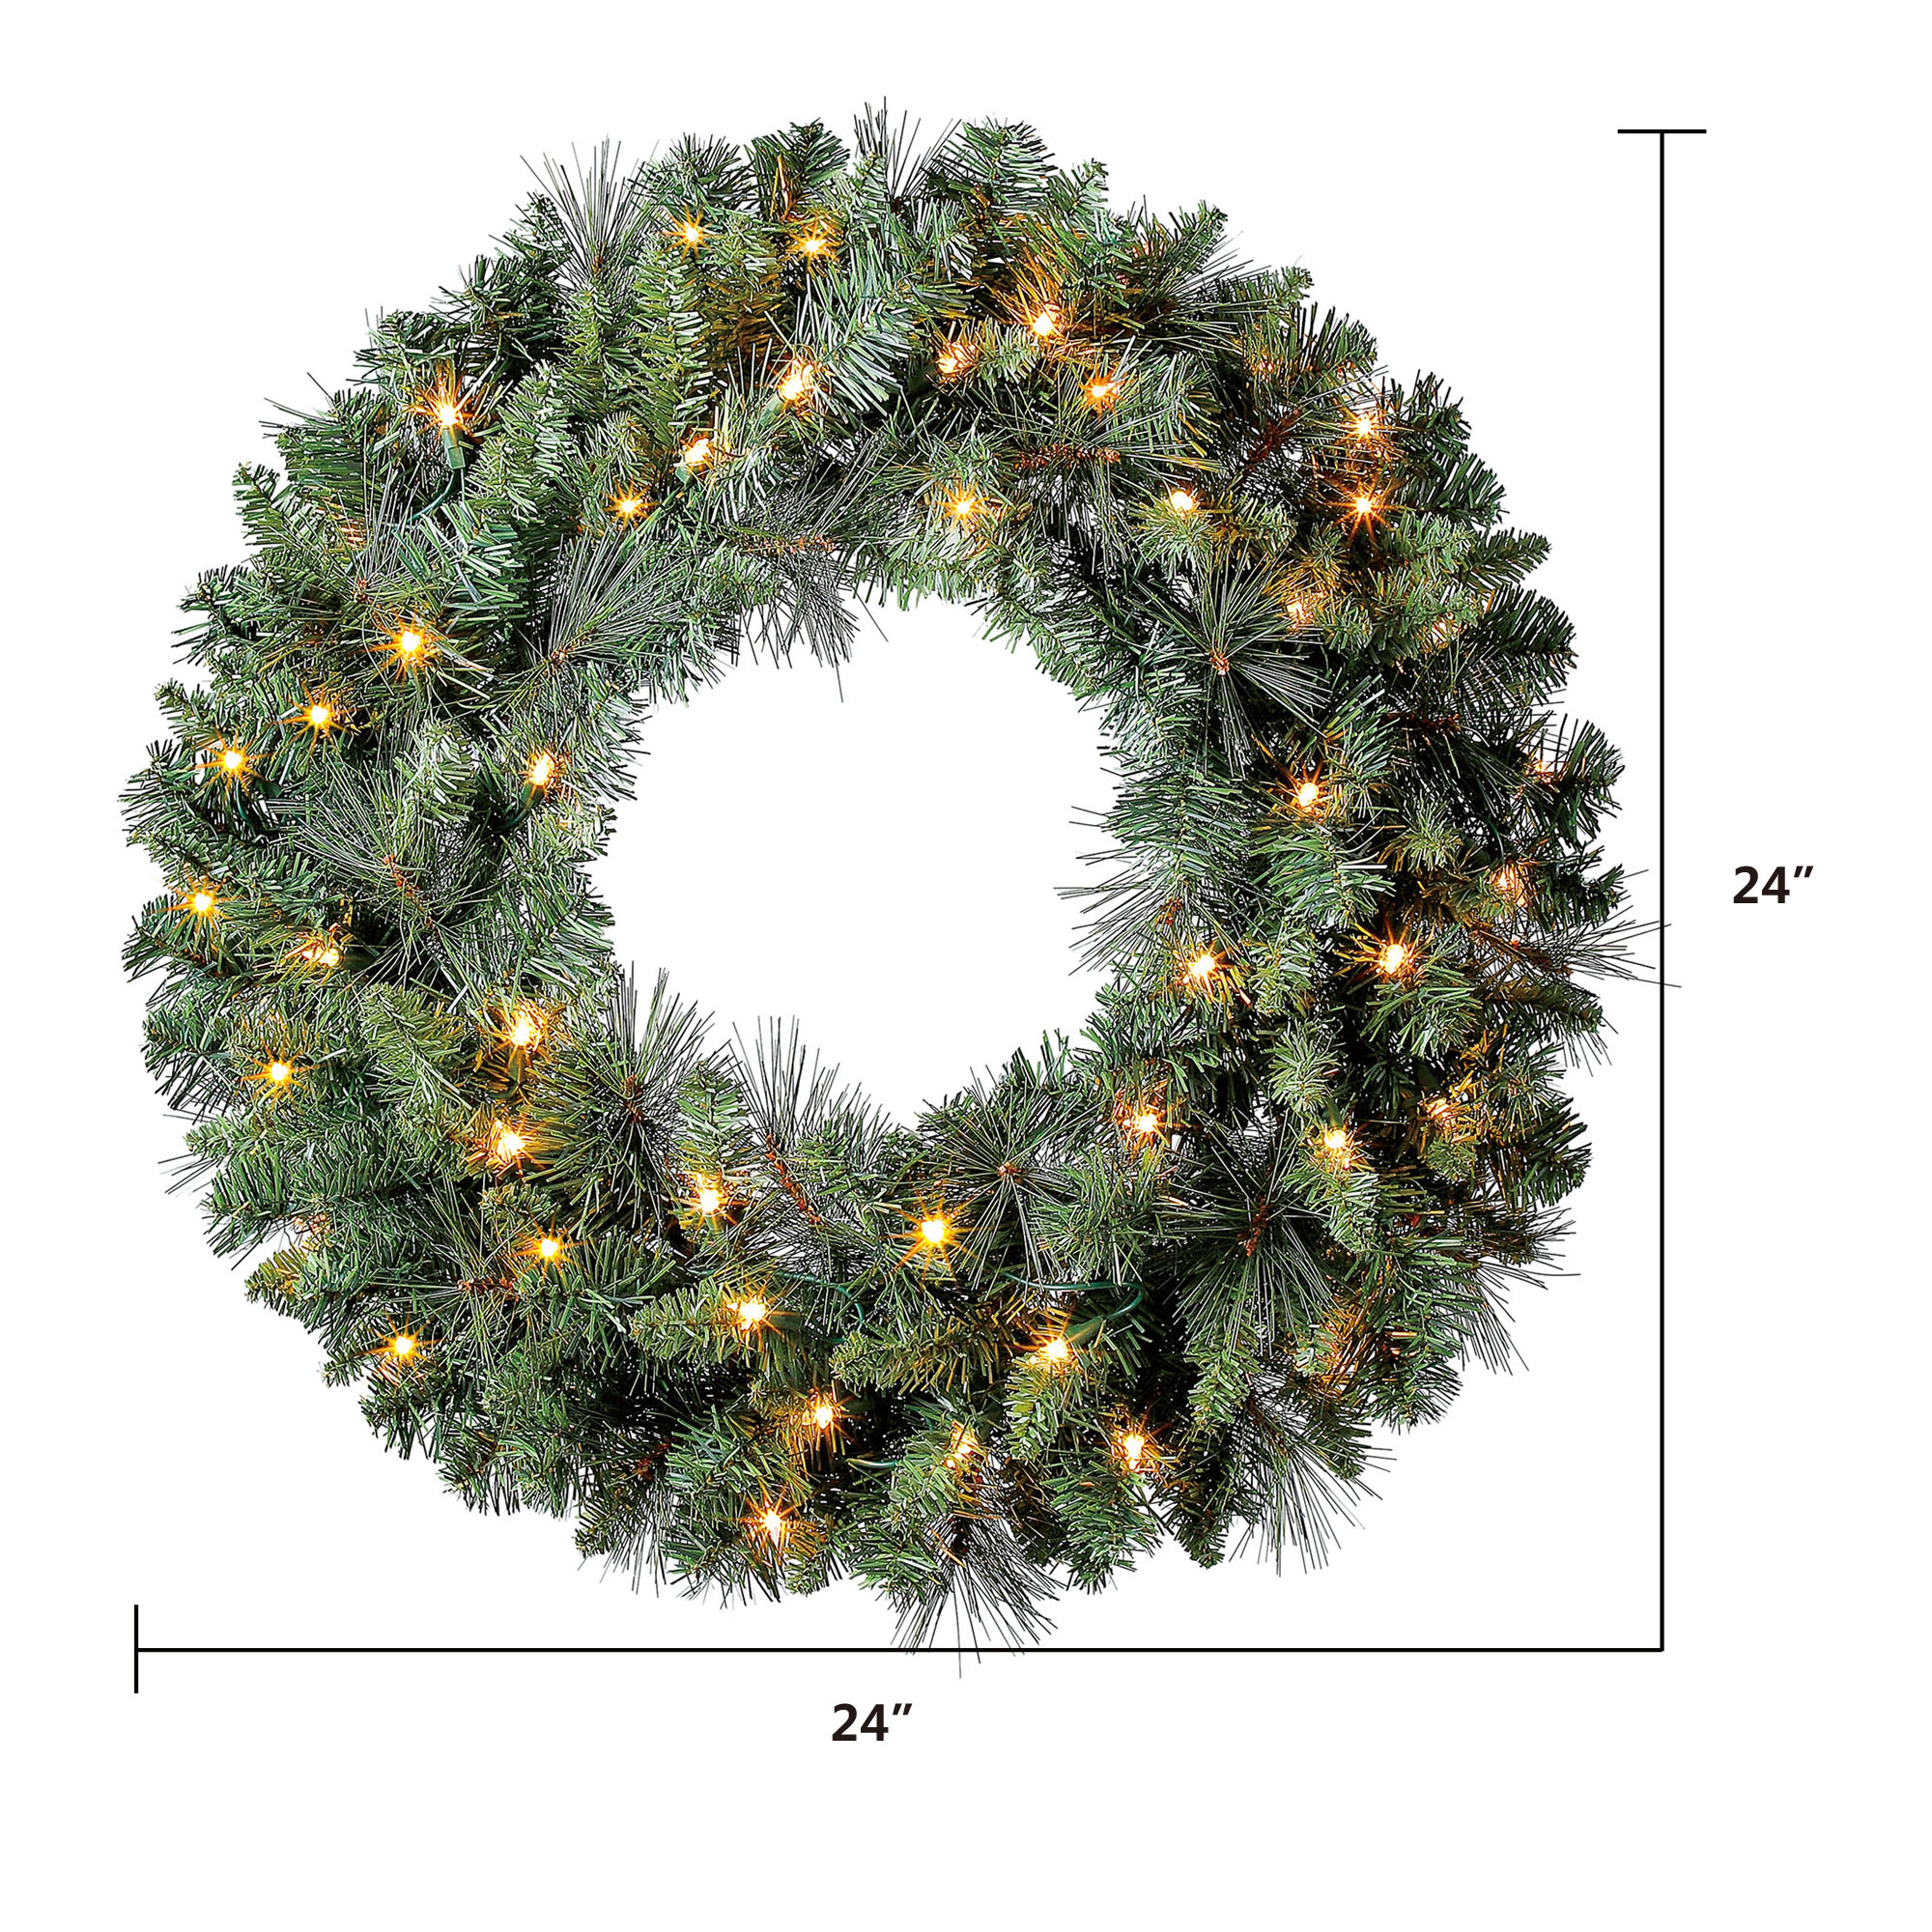 Holiday Time Pre-Lit Clear Scottsdale Pine Artificial Christmas Wreath, 24" - image 5 of 5